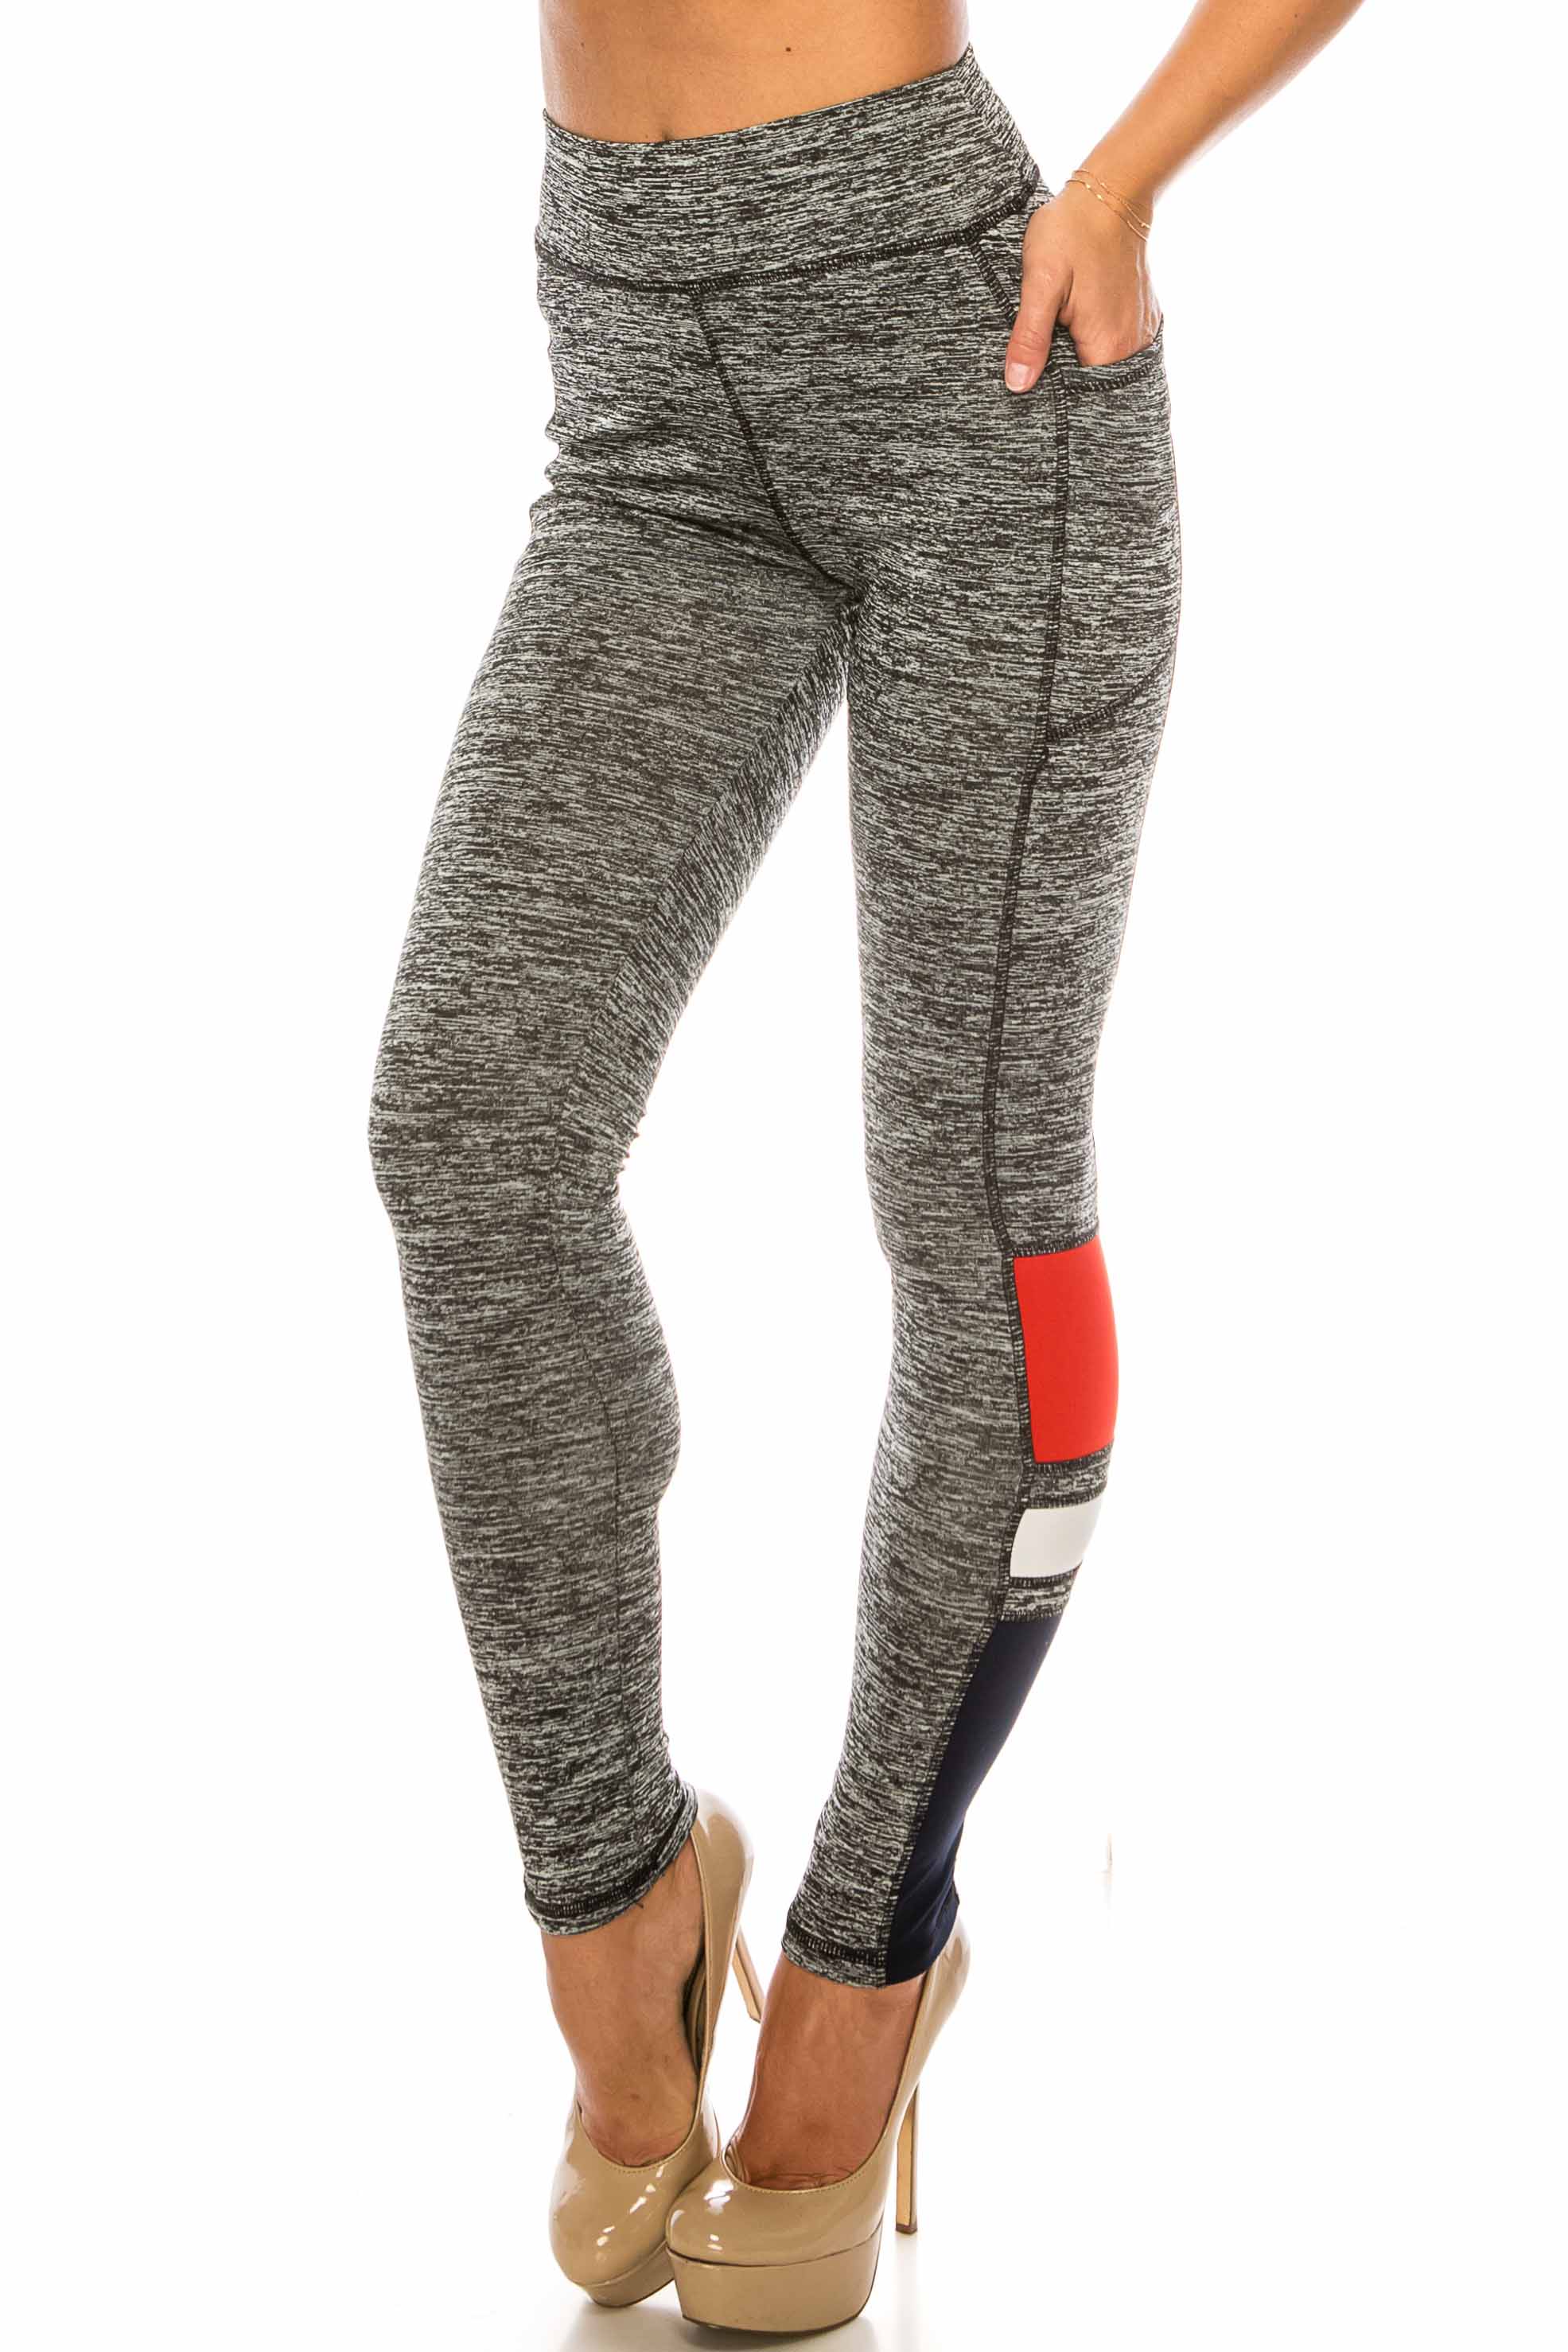 Wholesale Red Accent High Waisted Workout Leggings with Side Pocket